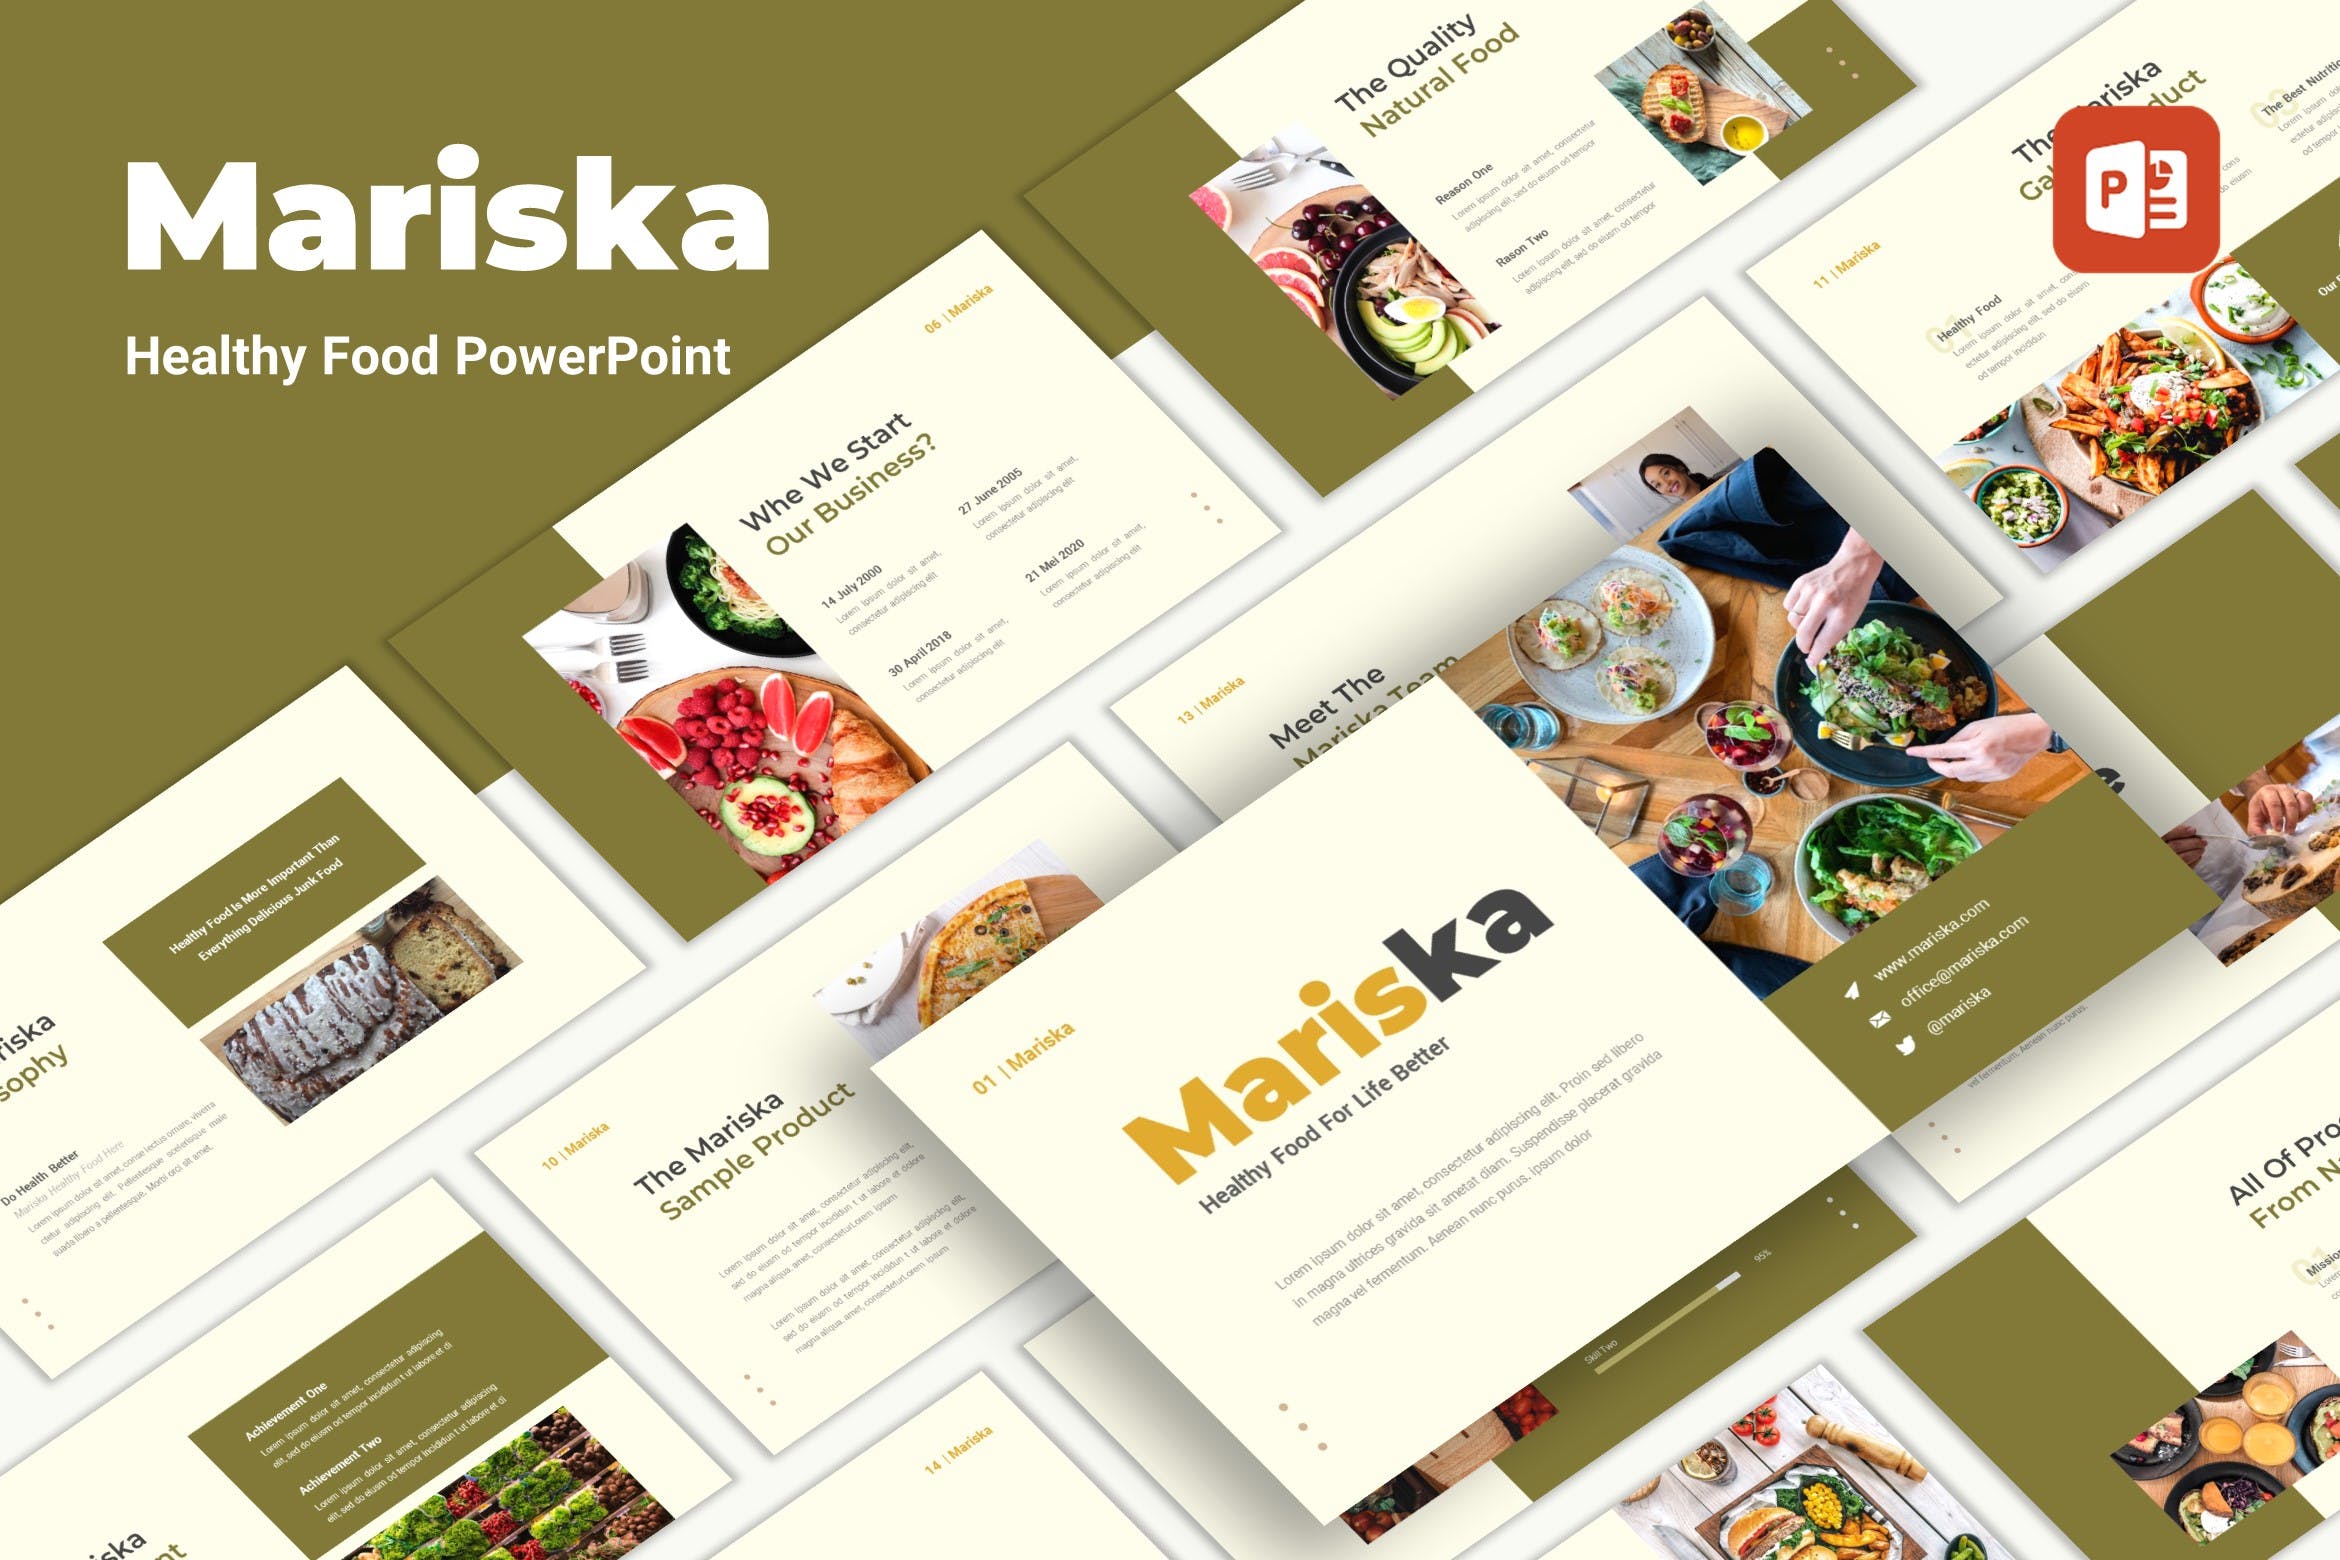 Cover image of Mariska - Healthy Food PowerPoint Template.